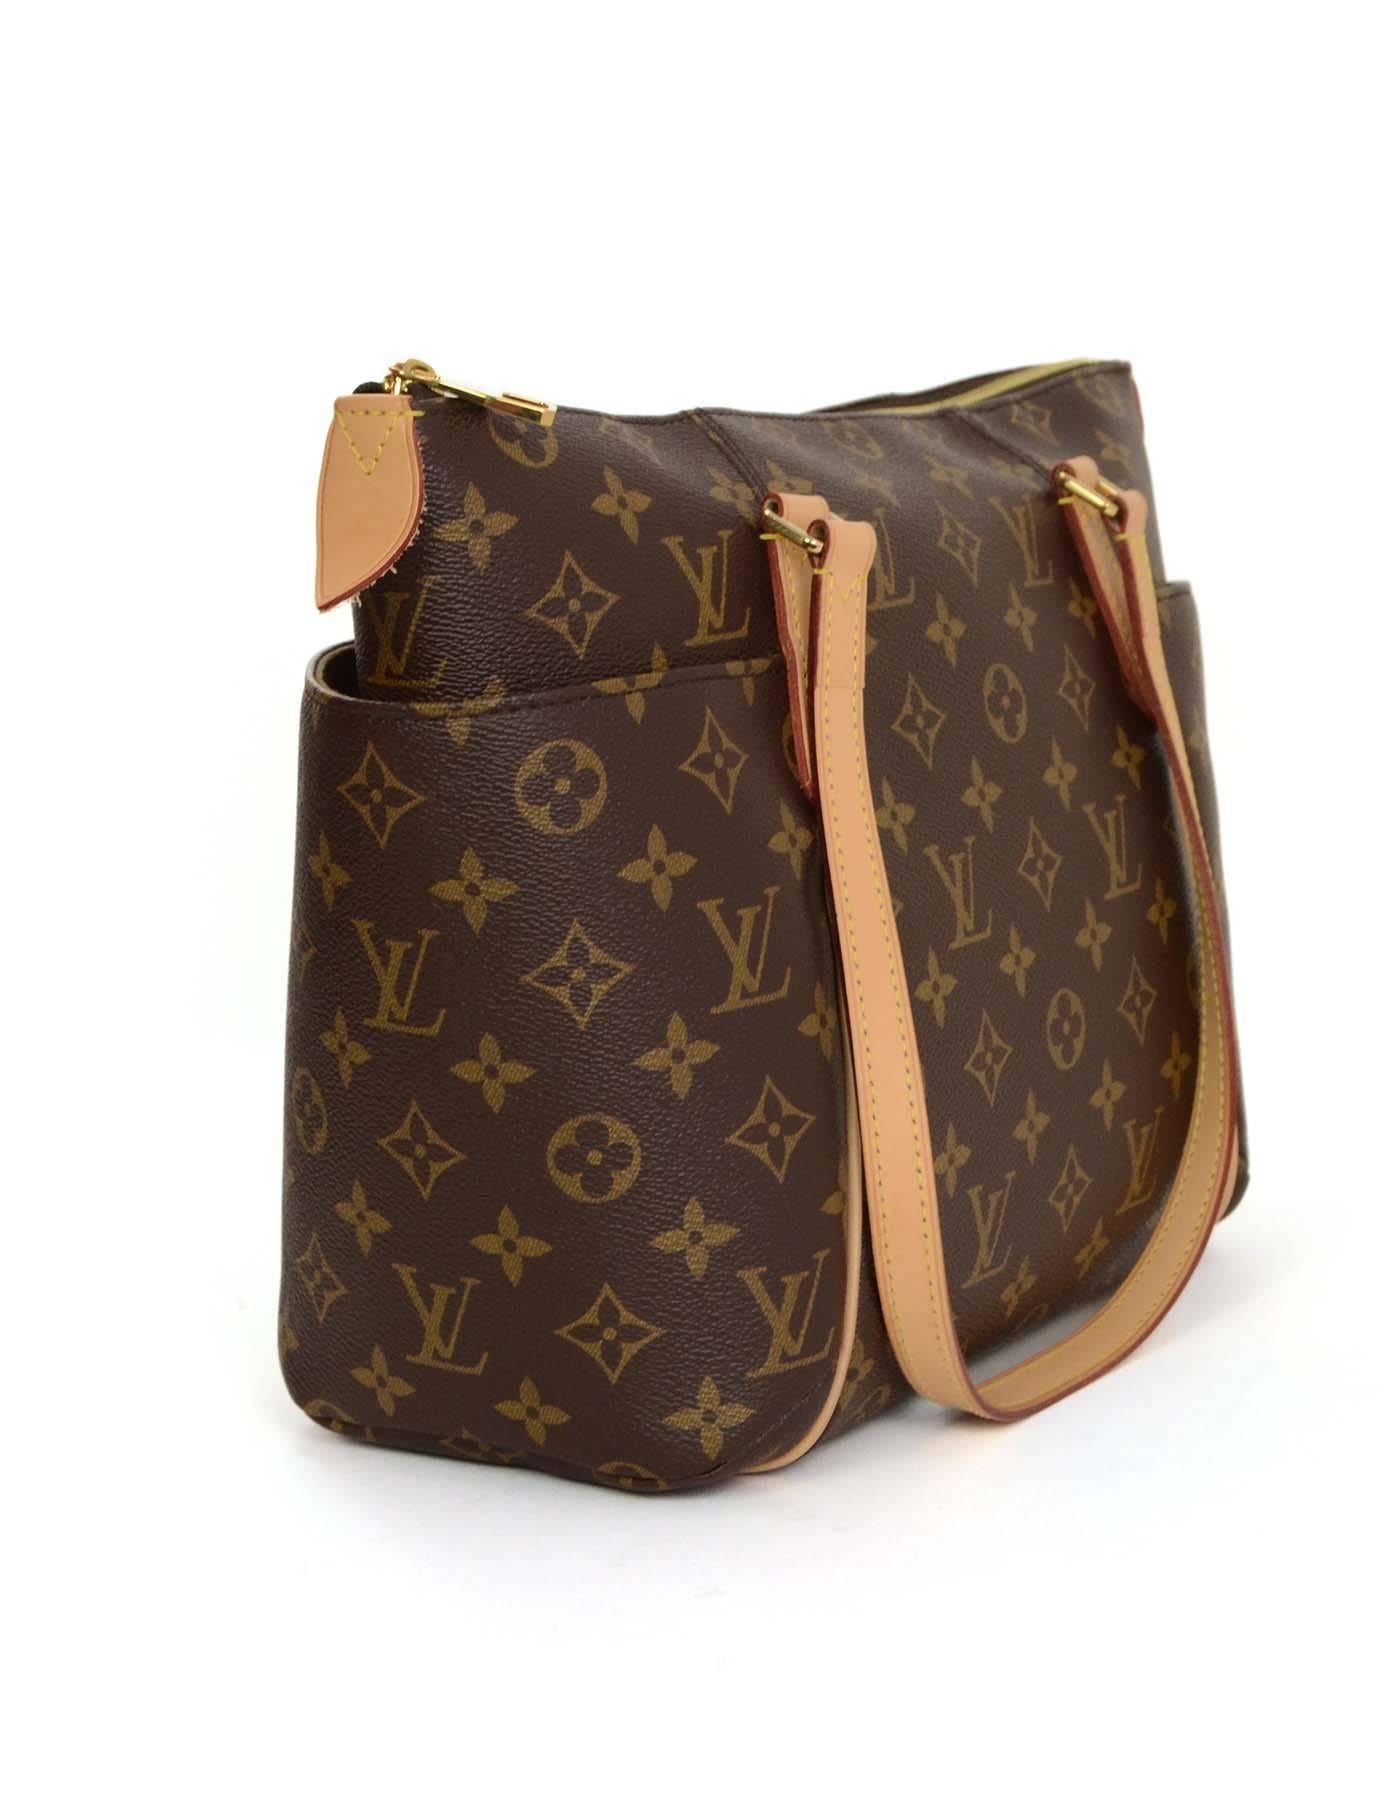 Louis Vuitton Monogram Totally PM

Features two open side pockets and zip top closure with an interior D-ring

    Made In: U.S.A
    Year of Production: 2015
    Color: Brown
    Materials: Canvas with leather straps and trim
    Lining: